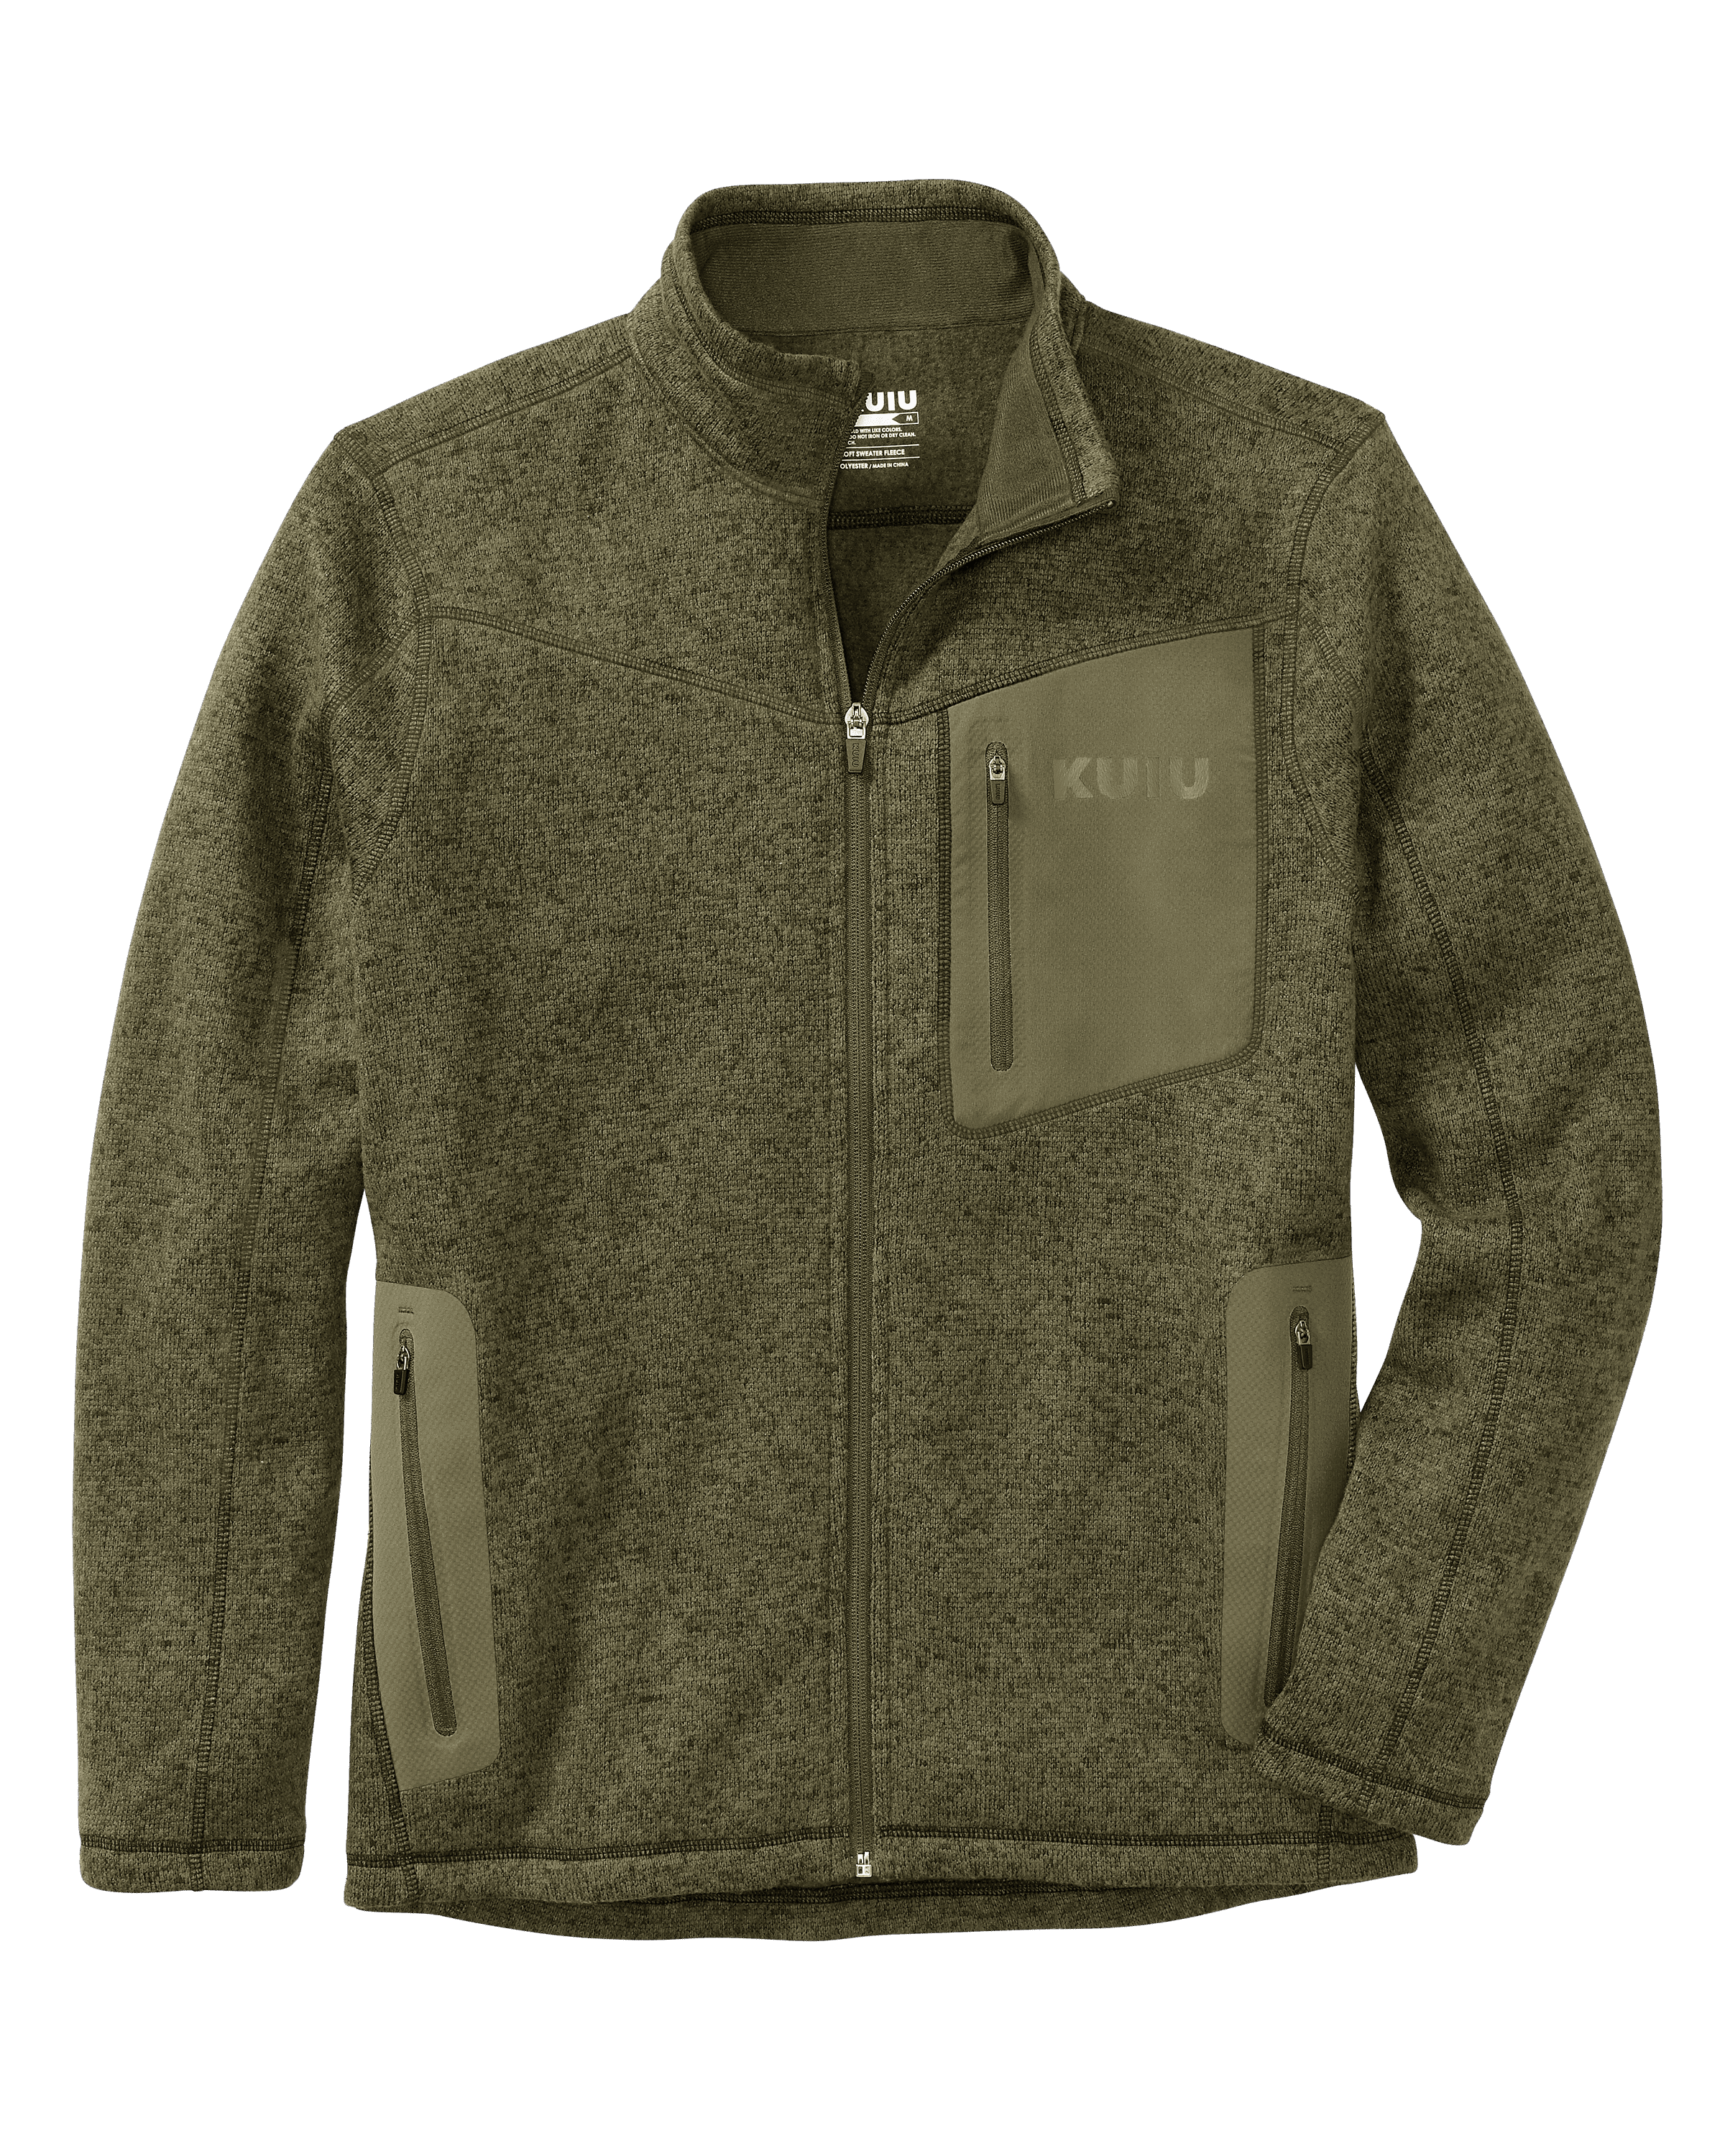 KUIU Outlet Base Camp Full Zip Sweater in Olive | Large